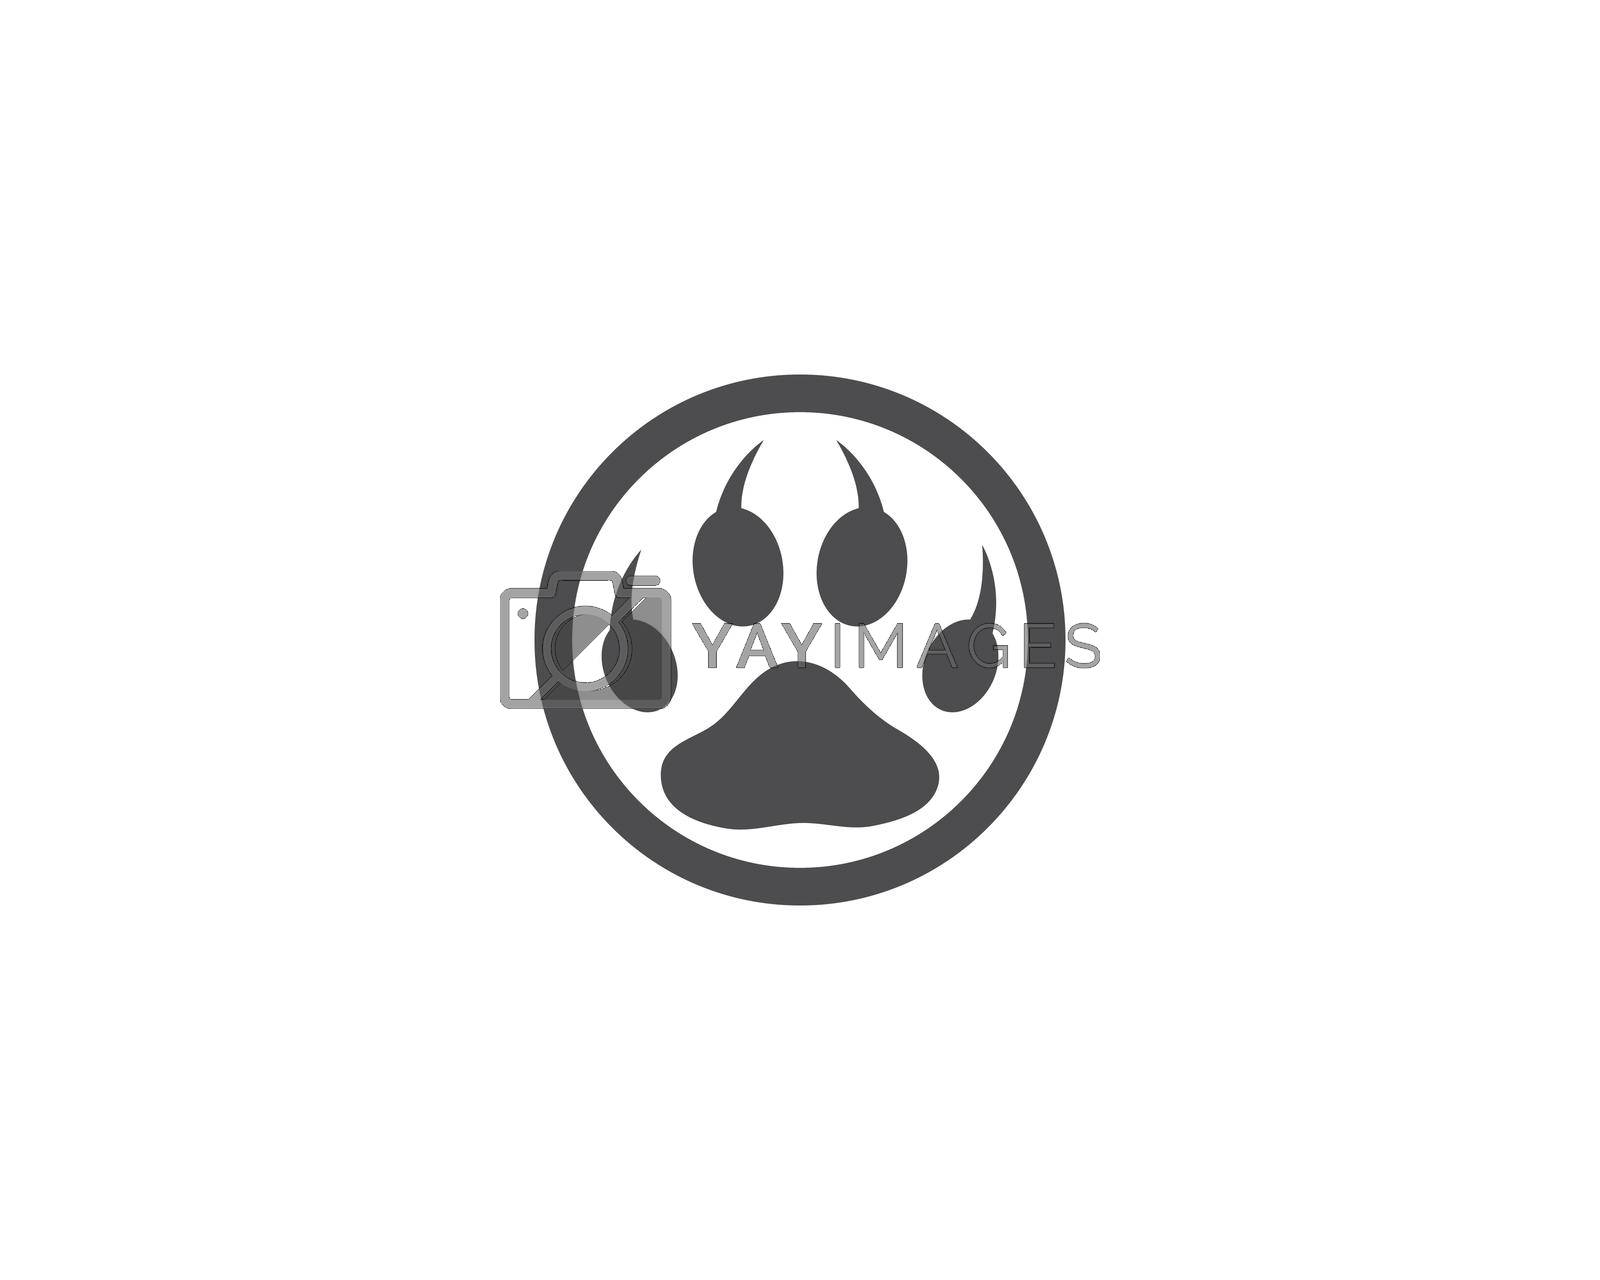 Royalty free image of Paw logo vector  by awk